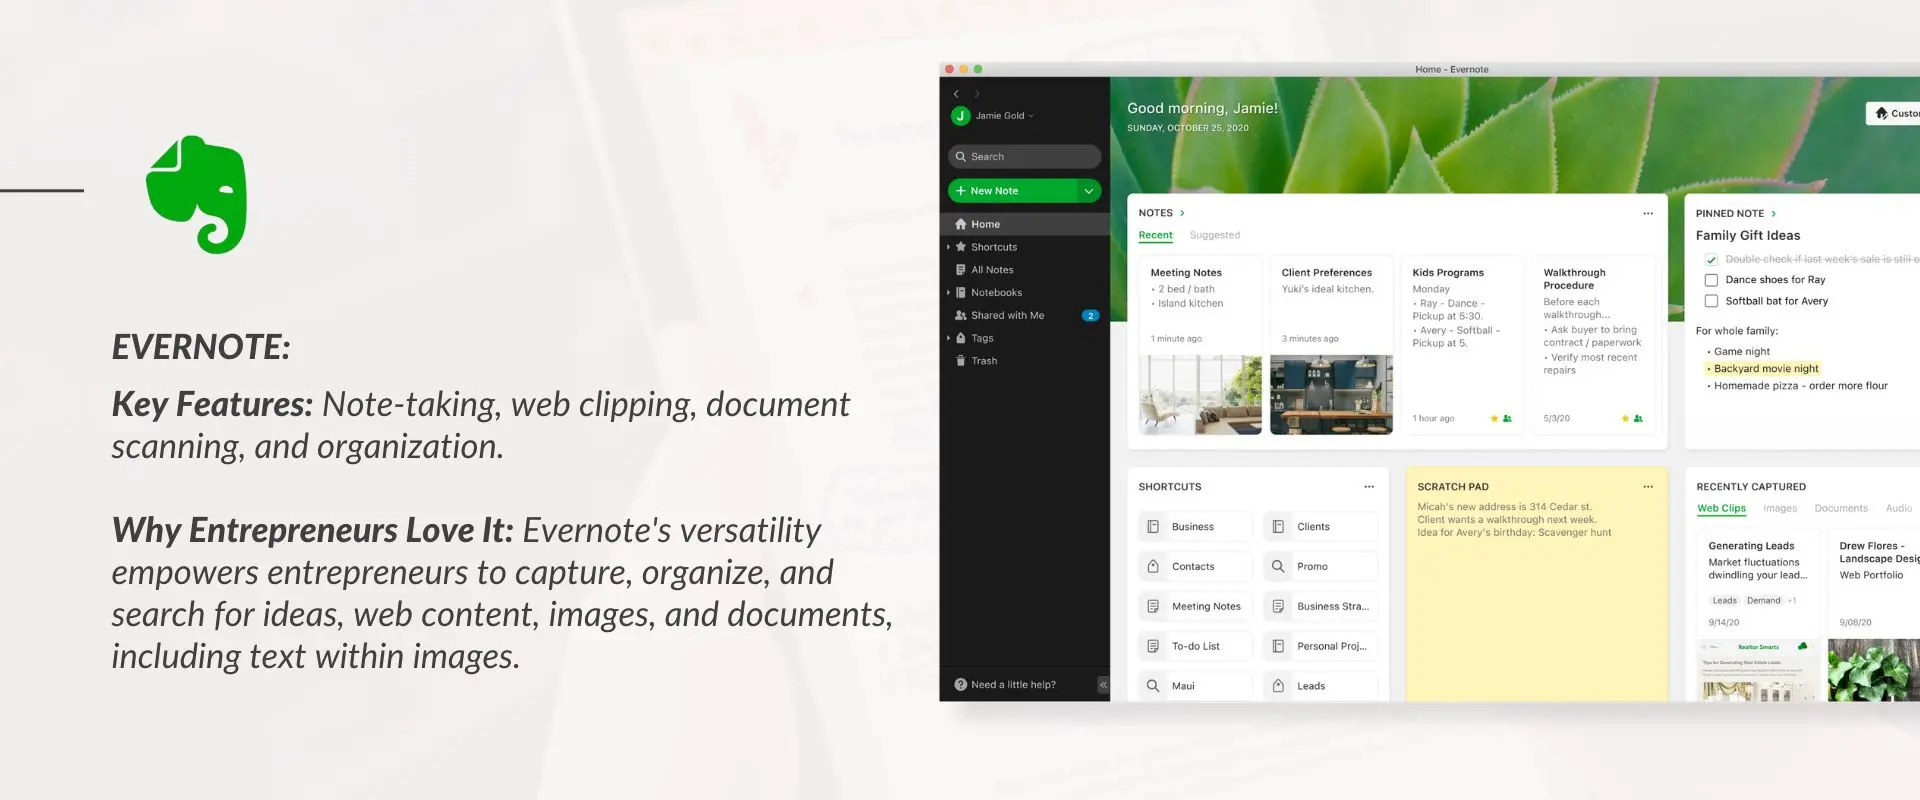 Evernote note taking tool interface